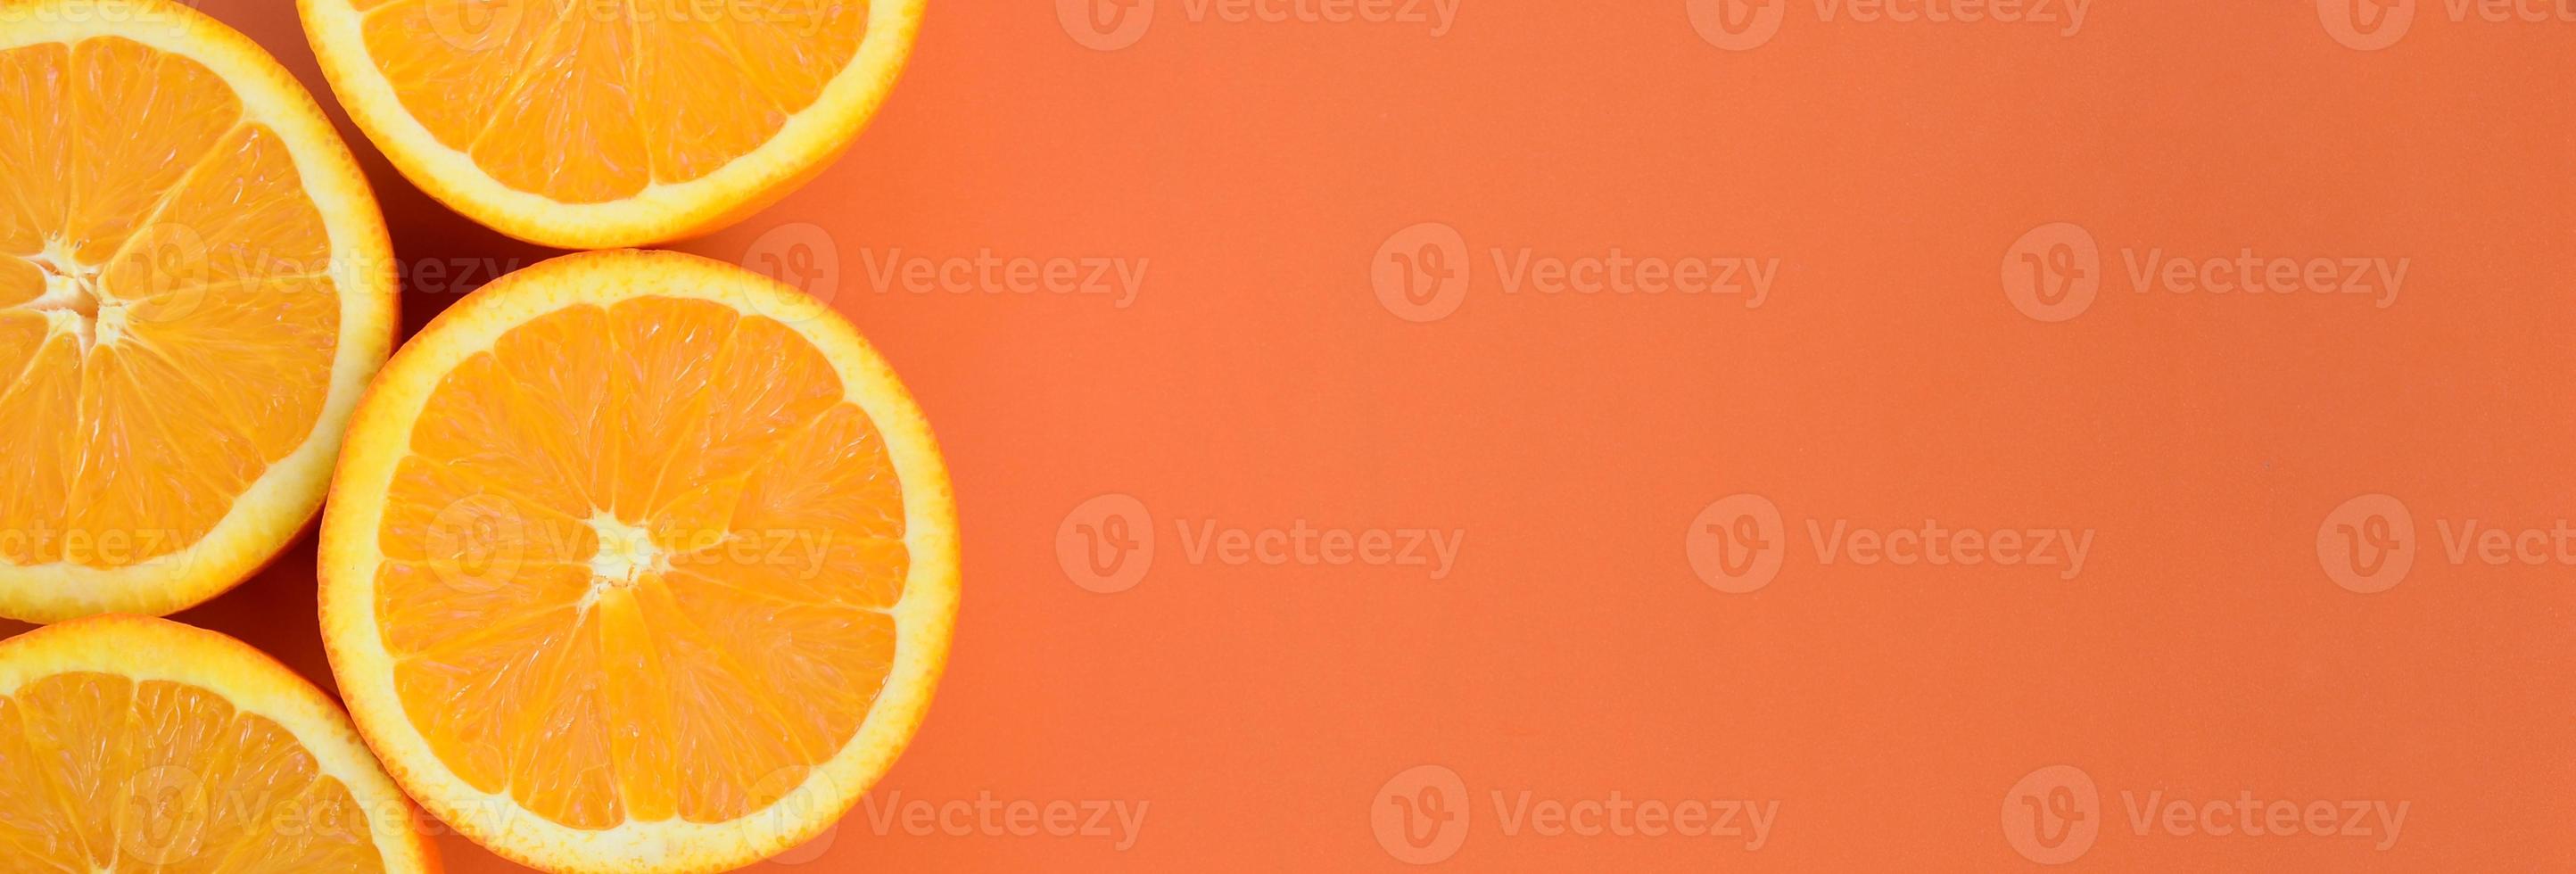 Top view of a several orange fruit slices on bright background in orange color. A saturated citrus texture image photo